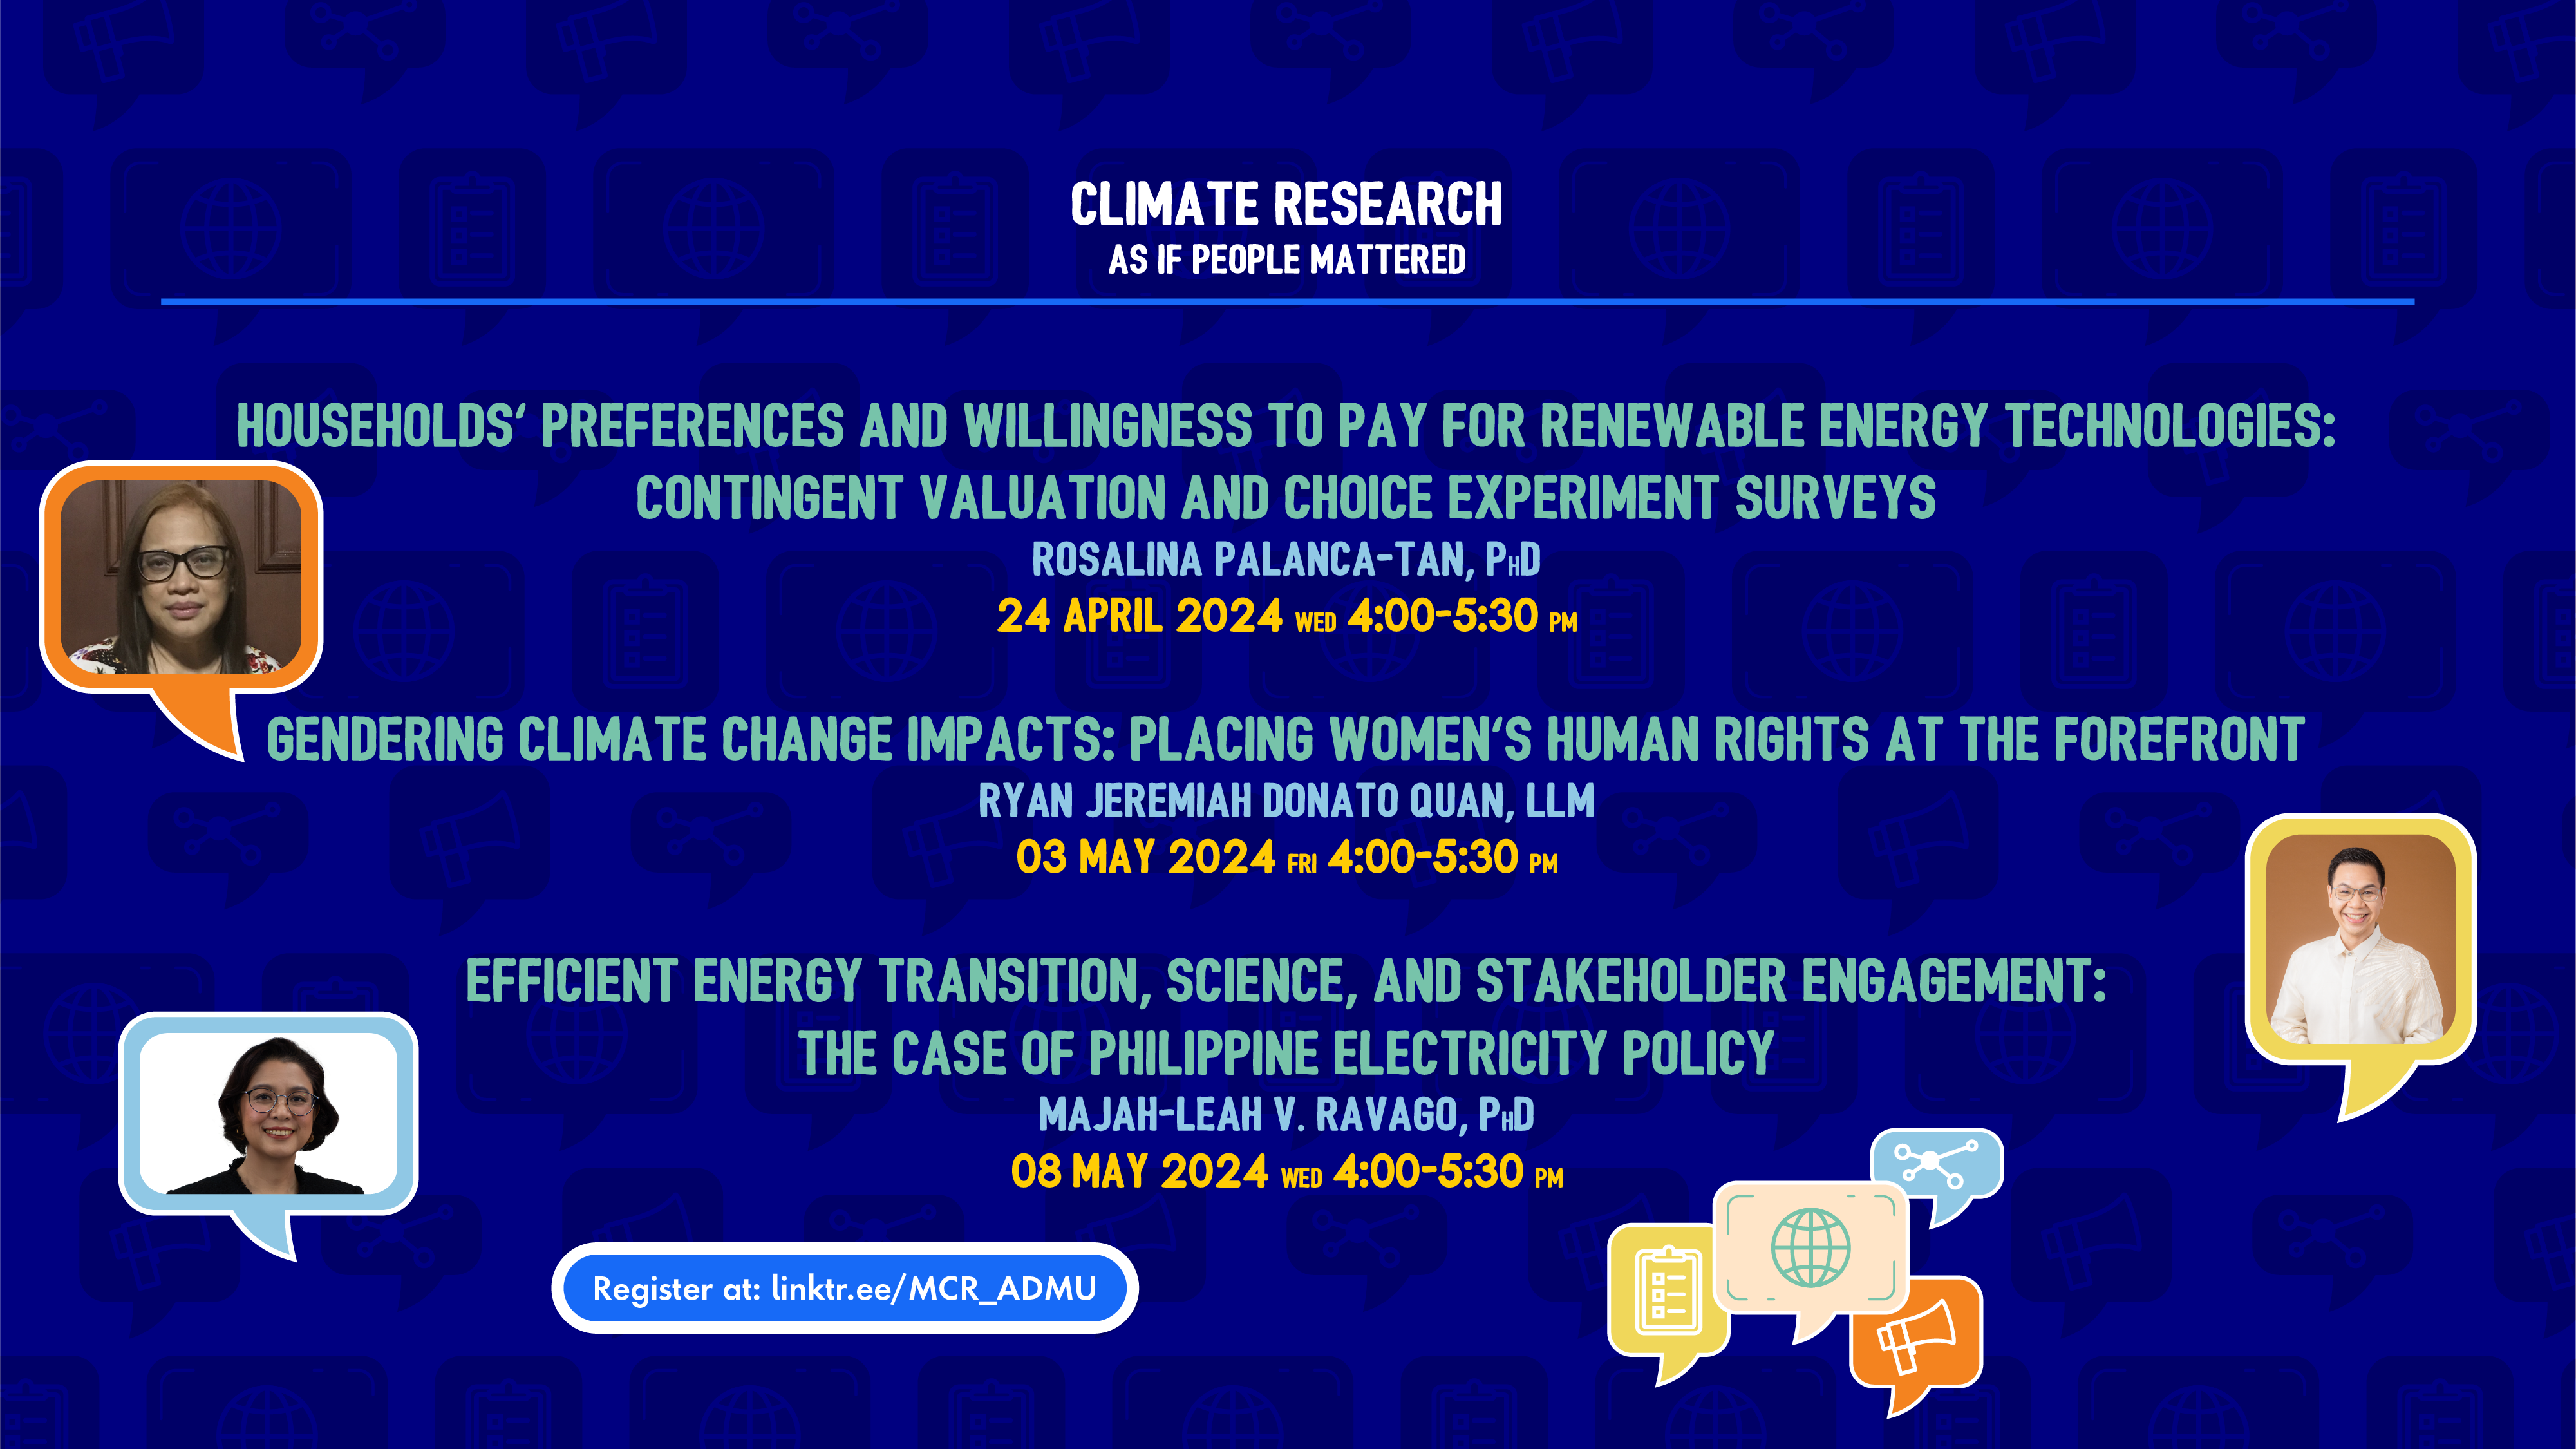 The topics, schedule, and speakers for the three webinars of the "Climate Research 'As If People Mattered'" series. The webinars will occur on 24 April, and on the 3rd and 8th of May, from 4:00 to 5:30pm.